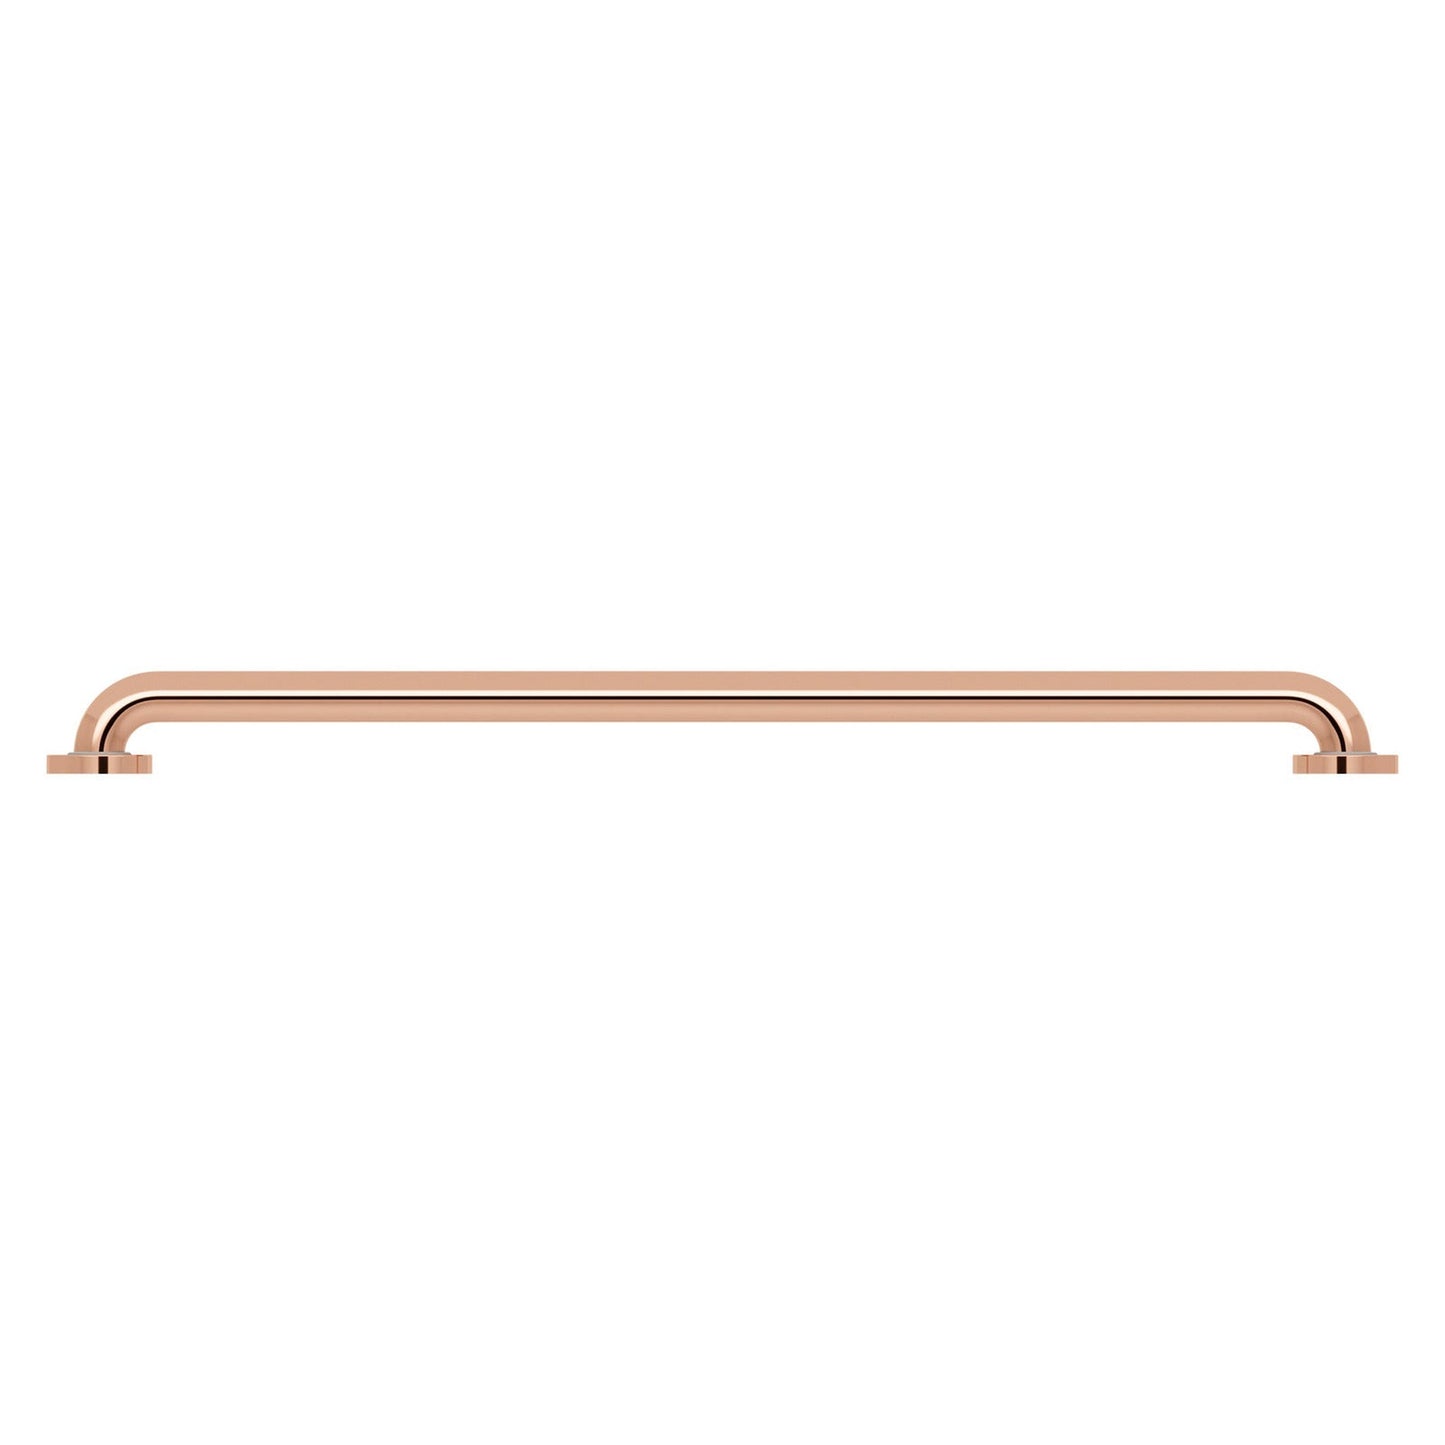 Evekare 36" x 1.5" Stainless Steel Concealed Mount Grab Bar in Rose Gold